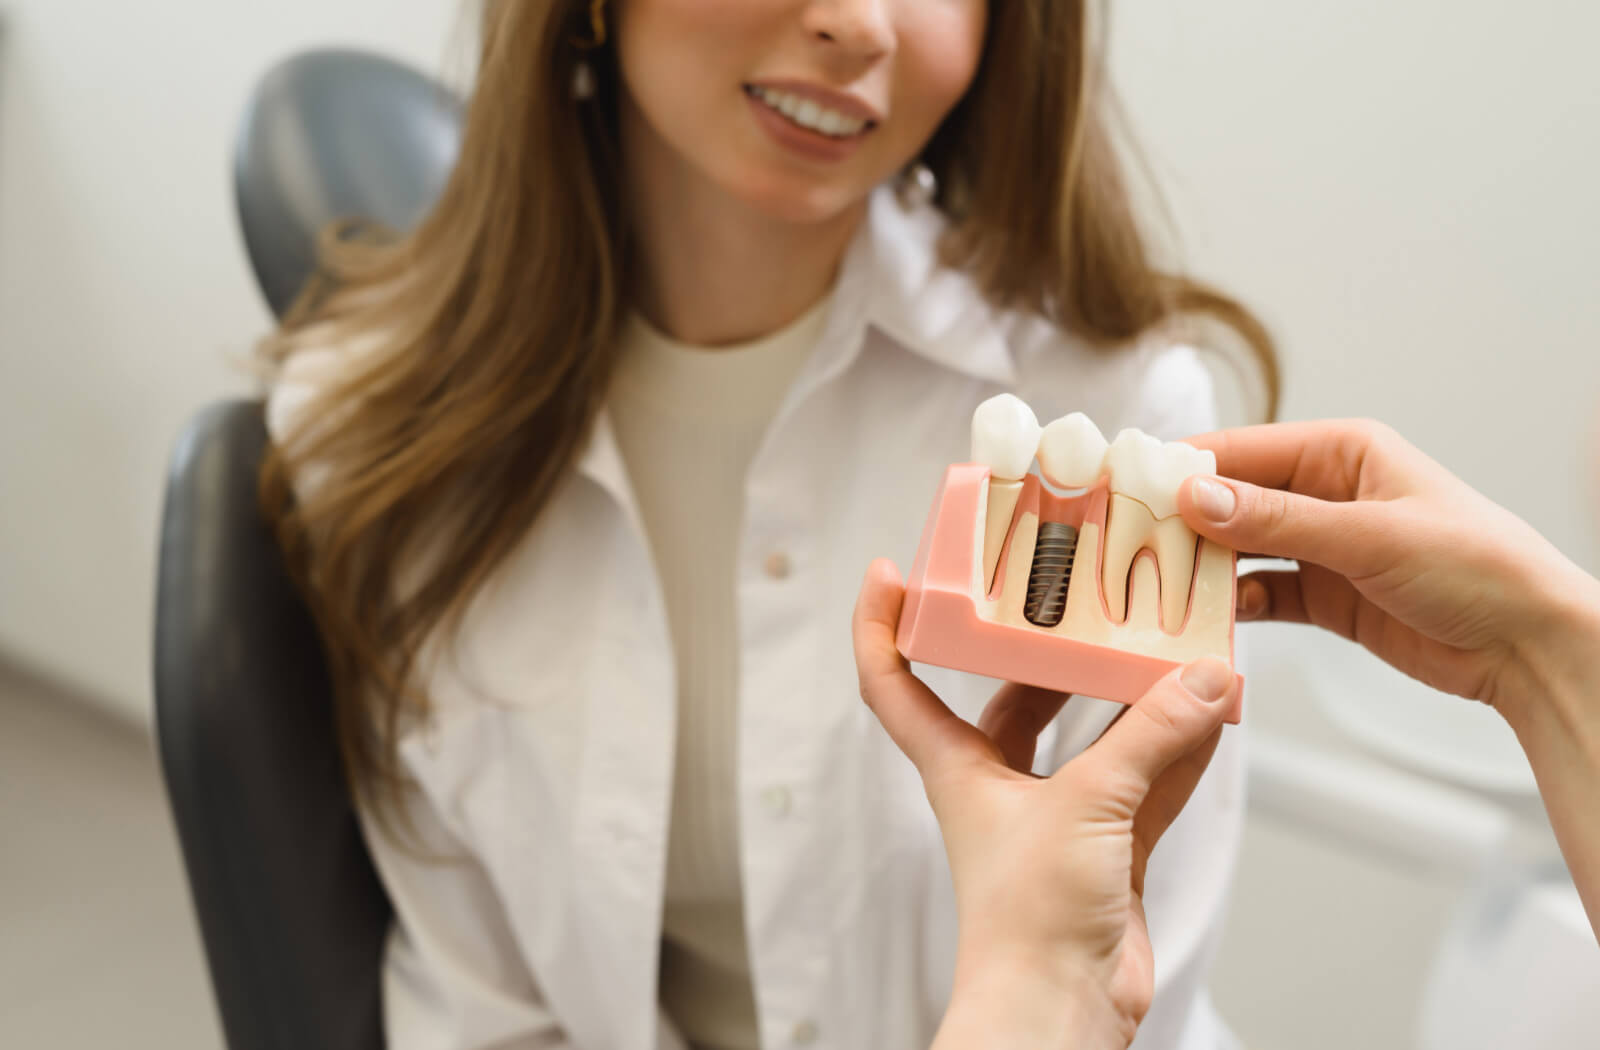 The dentist is showing a model of a dental implant to her patient.